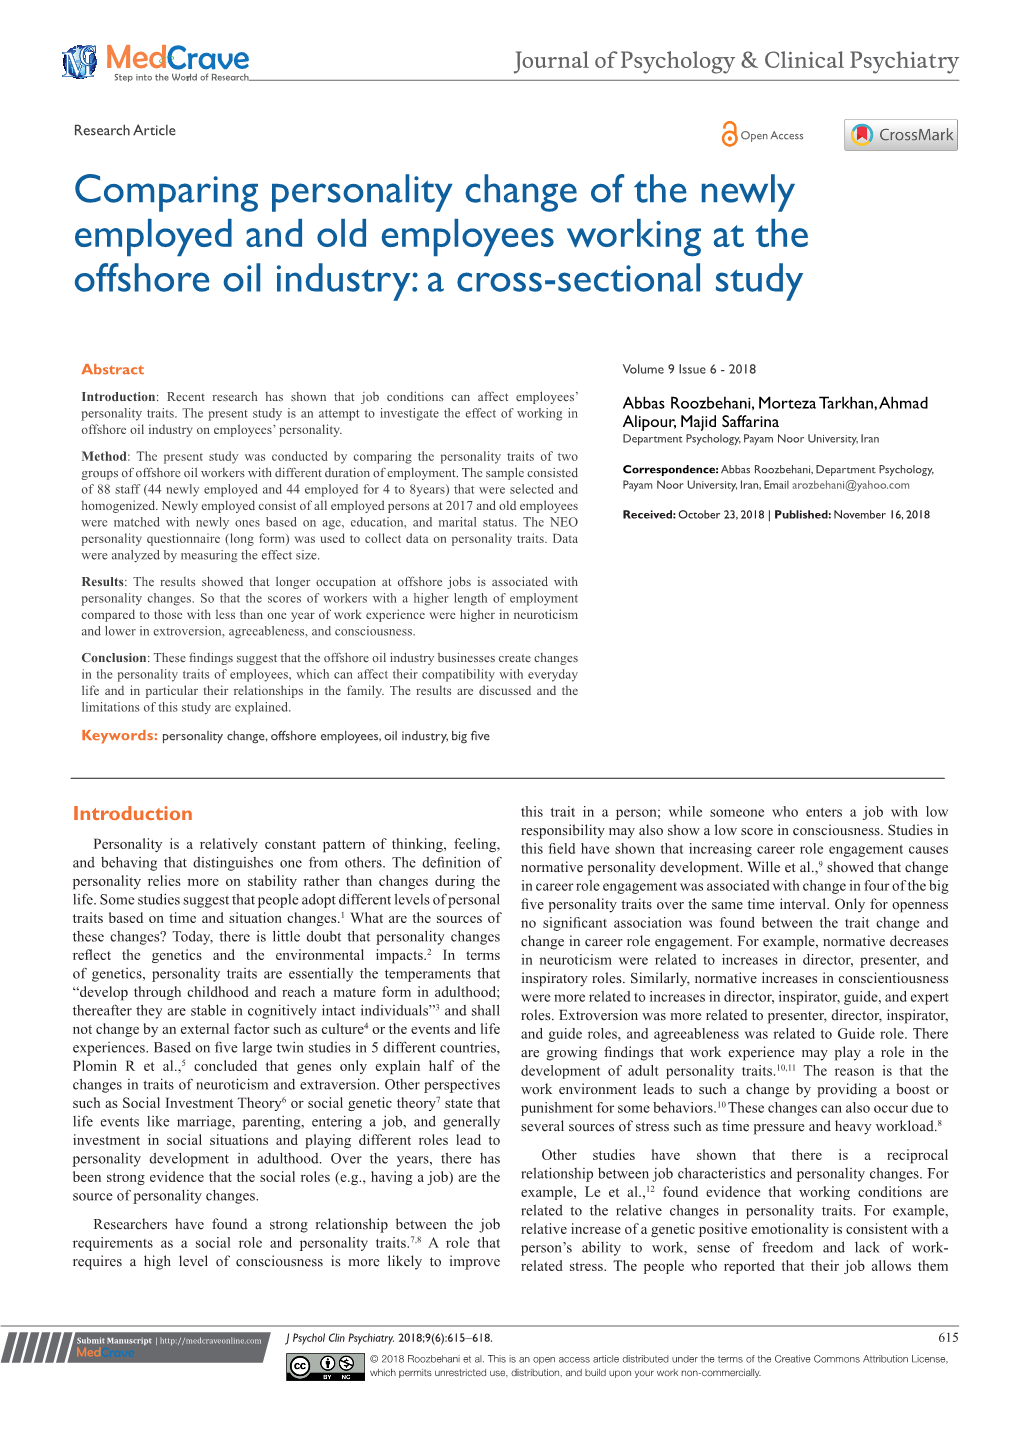 Comparing Personality Change of the Newly Employed and Old Employees Working at the Offshore Oil Industry: a Cross-Sectional Study